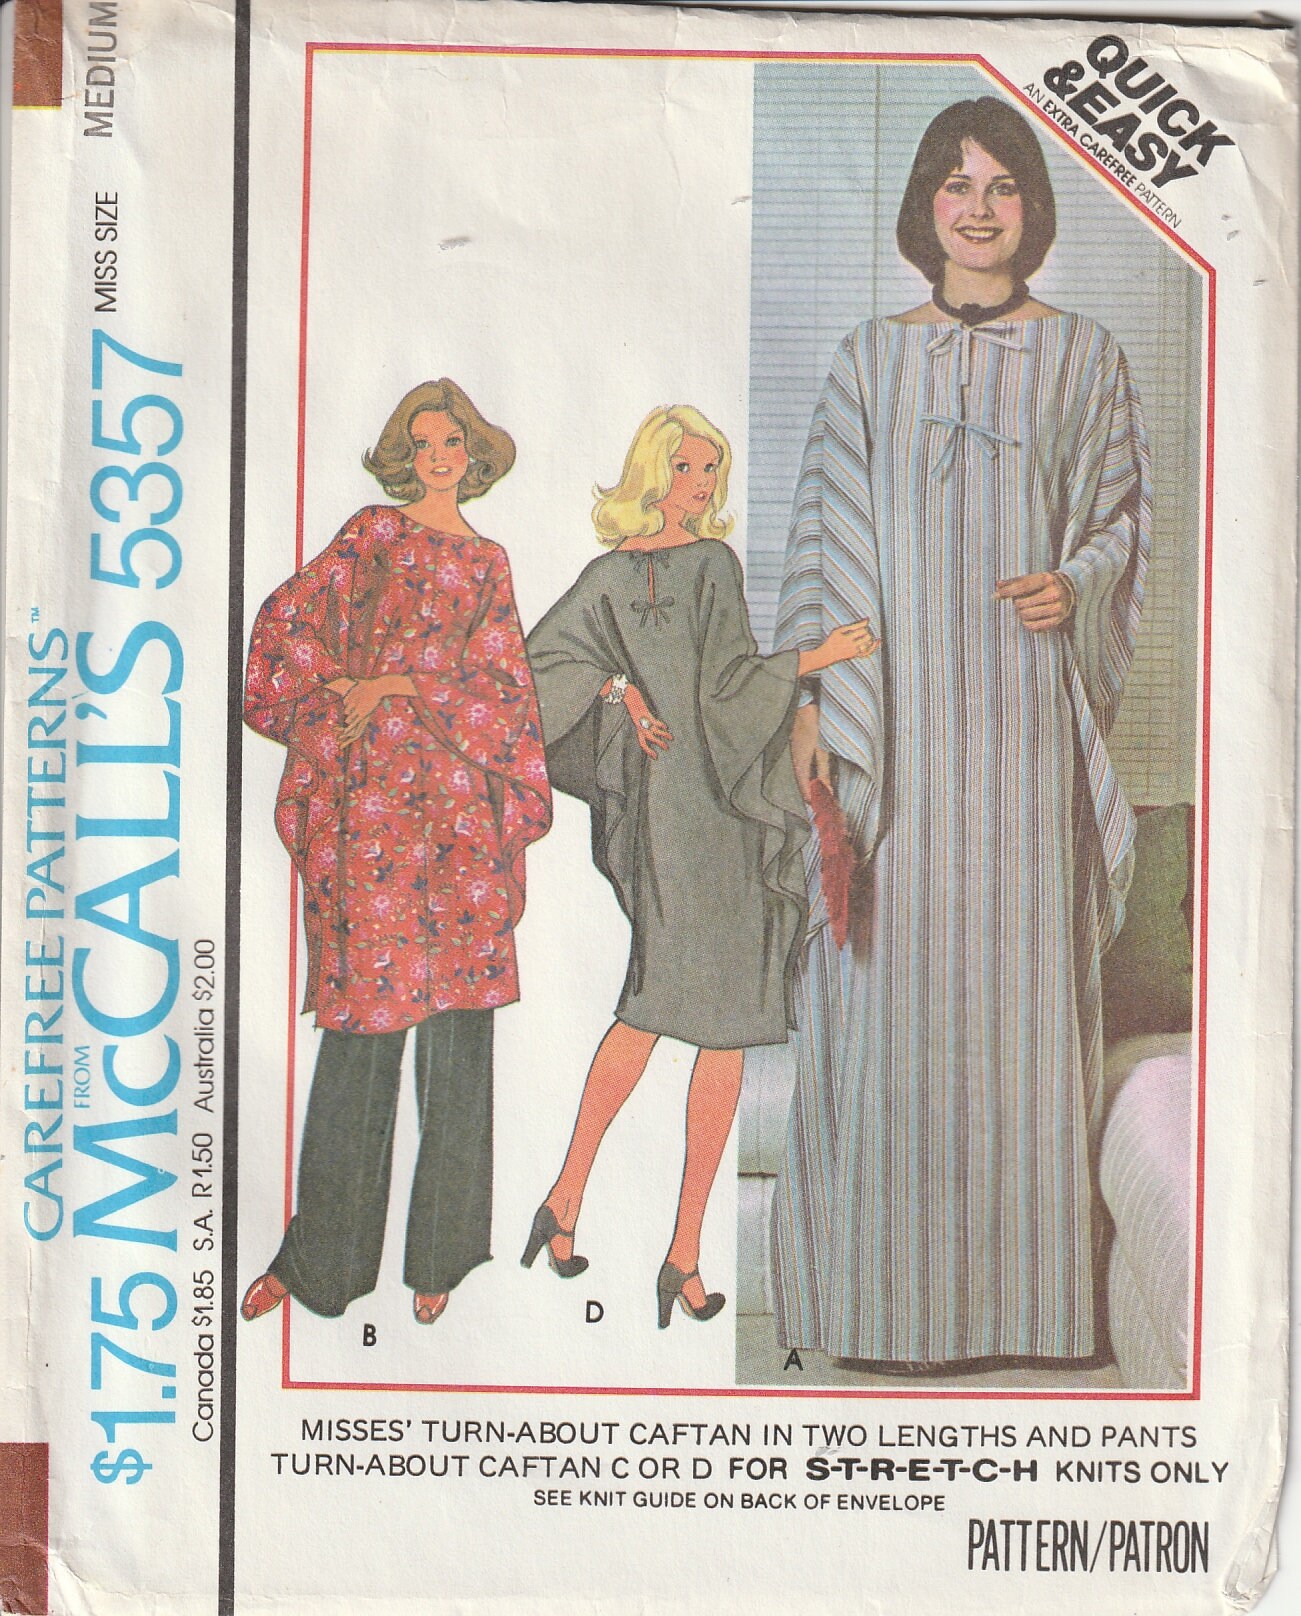 Hippie Size 14 UNCUT Vintage 1970's McCall's 4023 Miss Midriff Top and Pants Dropped Shoulder Line